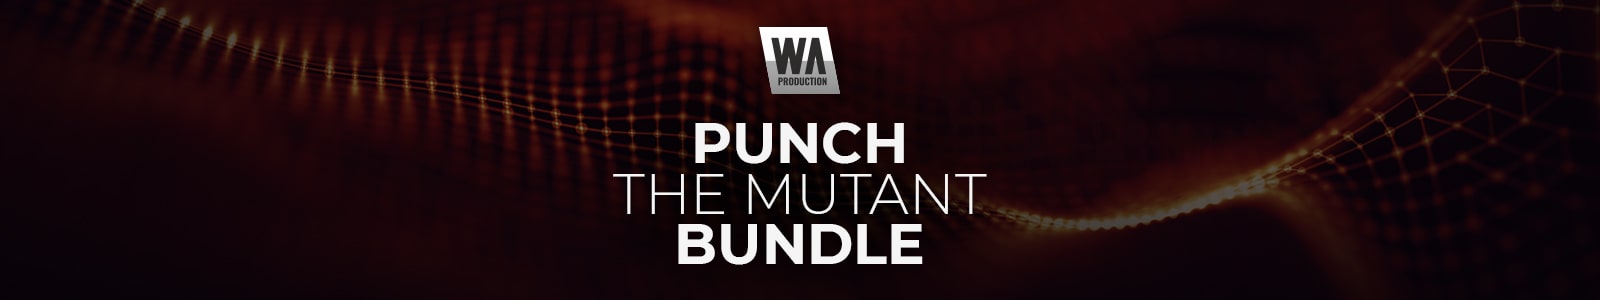 Punch the Mutant Bundle by WA Production